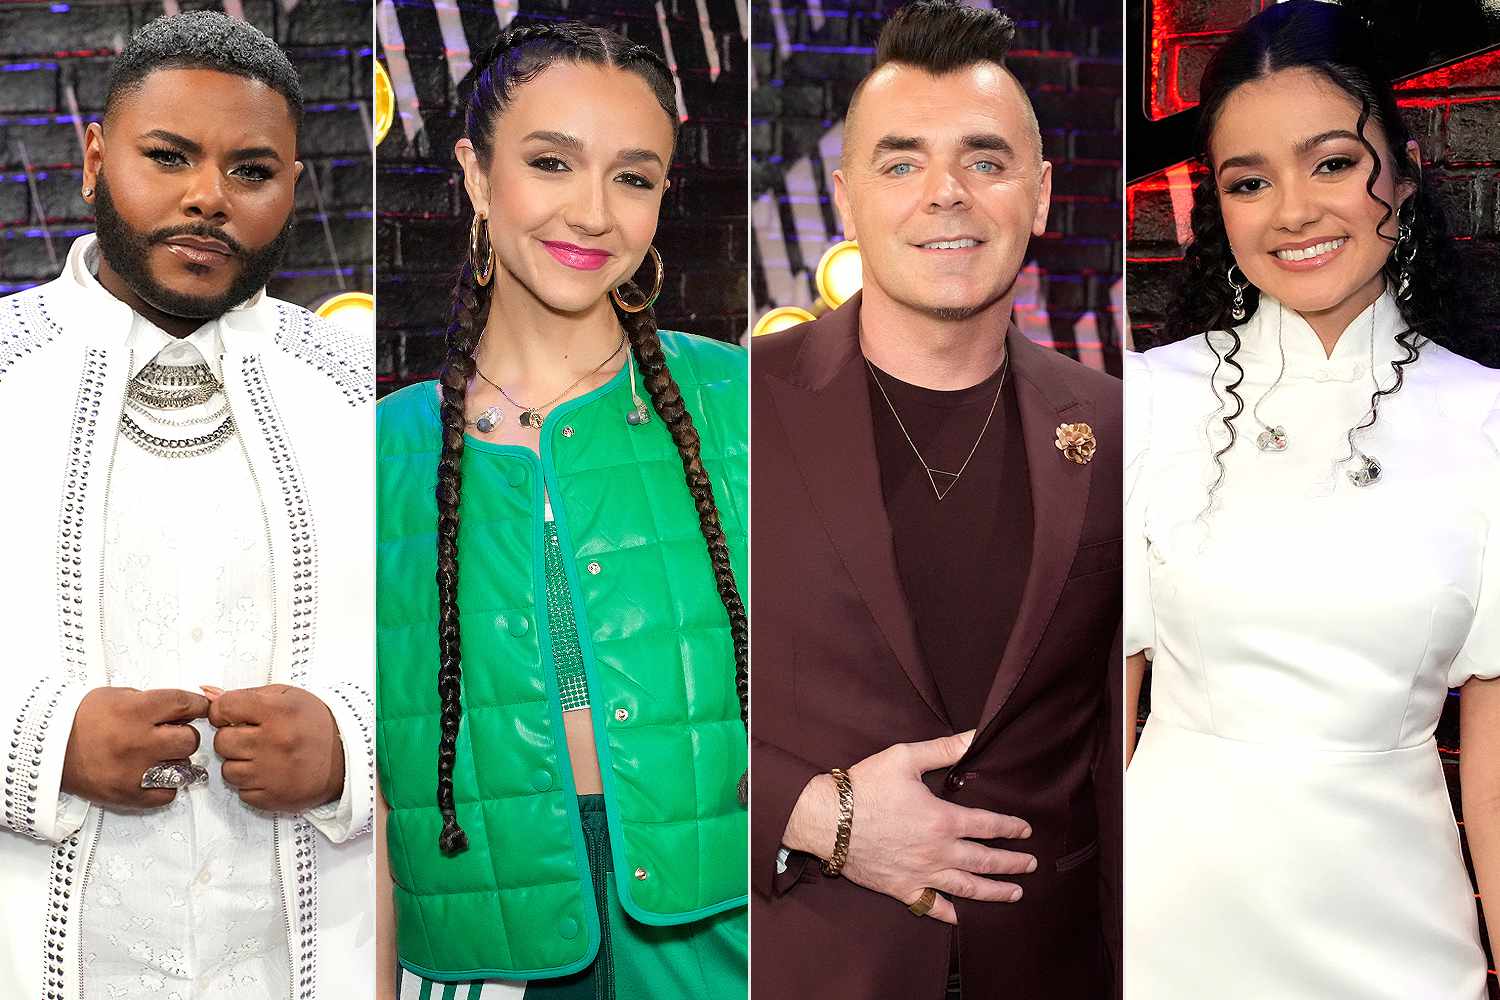 Top 9 of “The Voice” Reveal Their Secret Weapon on the Show: A 'Secret So Loud Yet Can Be Looked Over' (Exclusive)